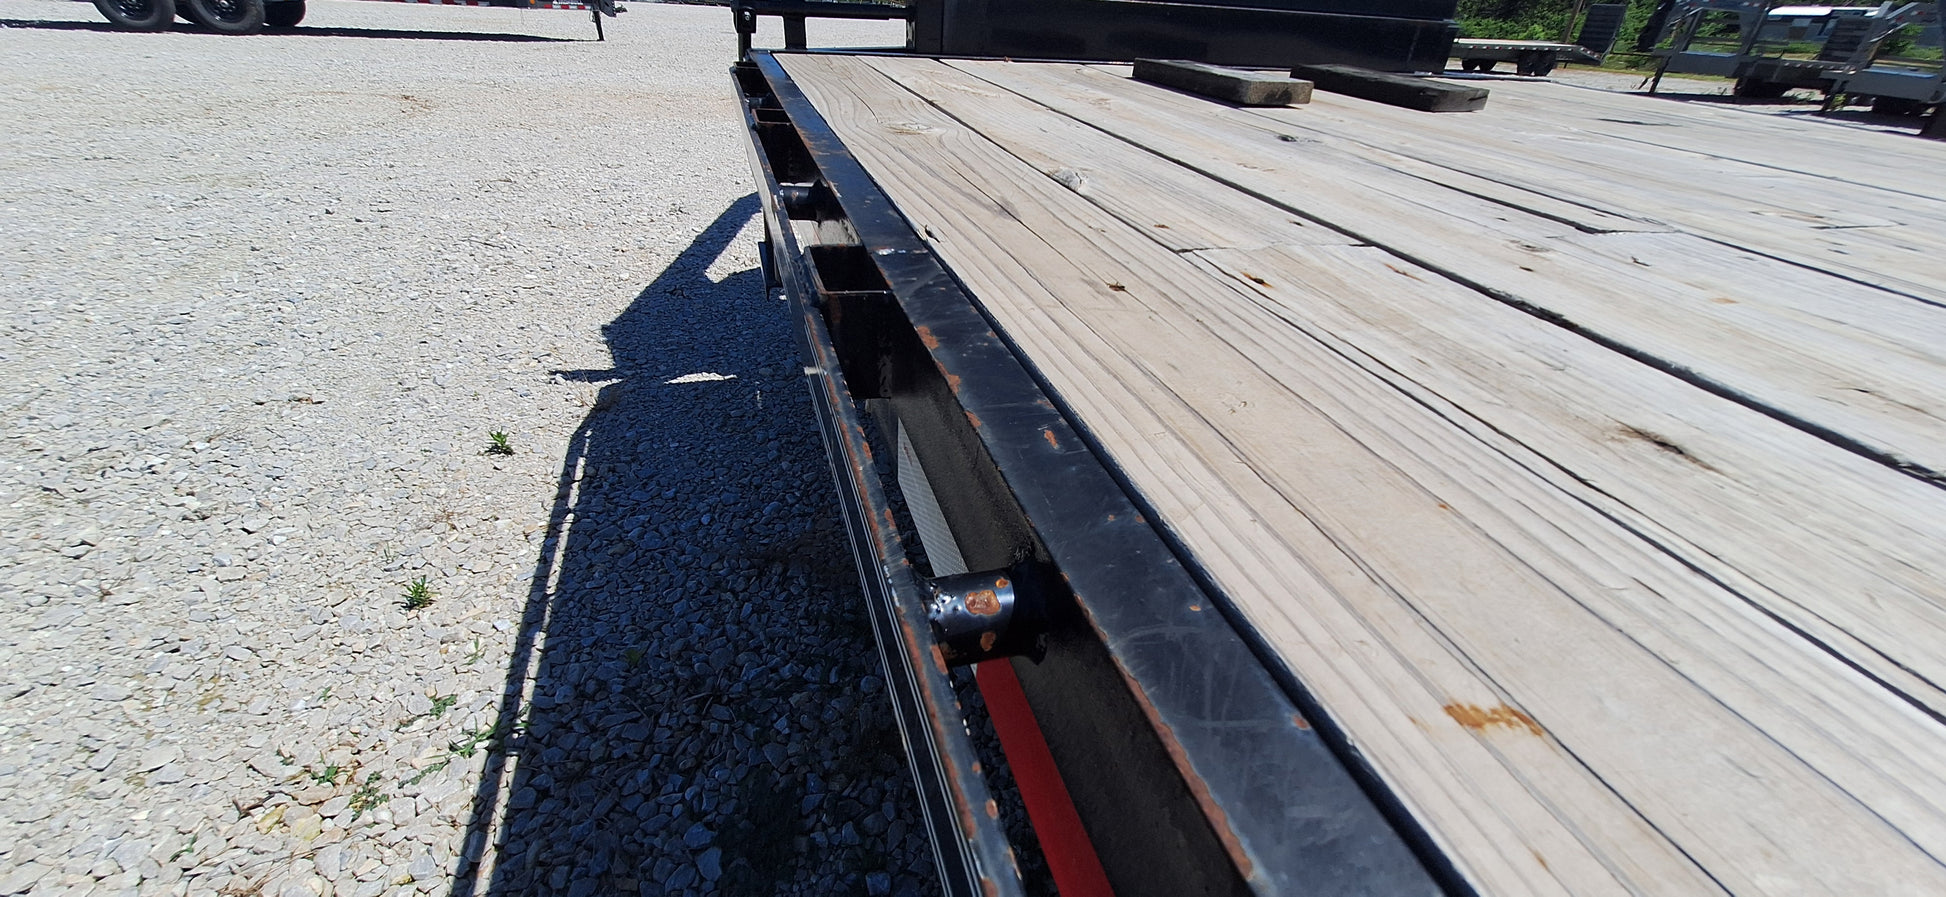 Rub Rail with Stake Pockets run the length of both sides for continuous tie downs